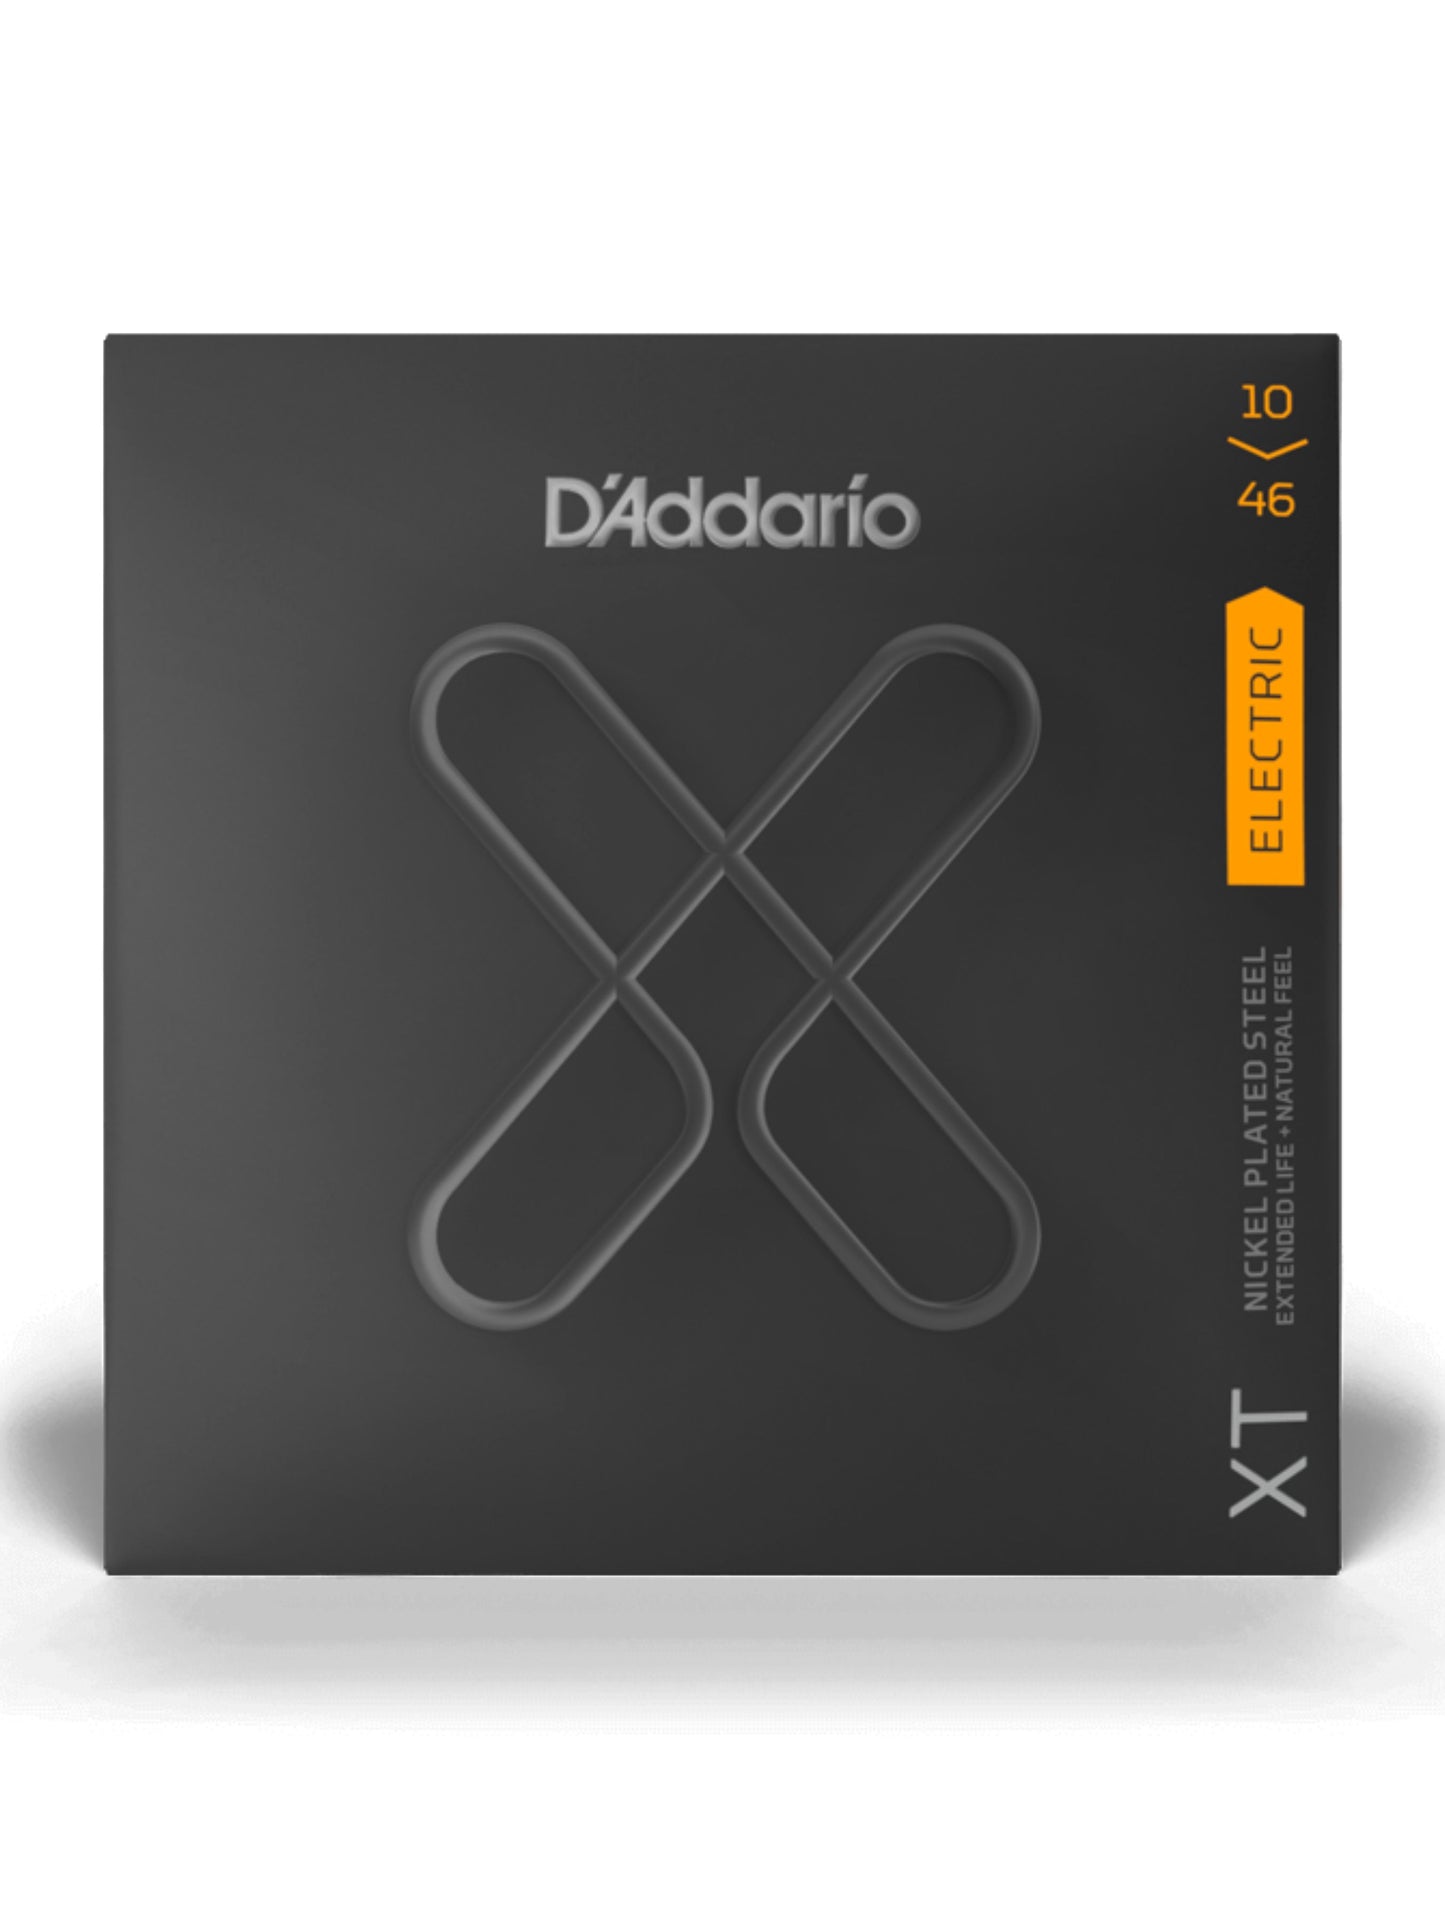 D'Addario XT Nicked Plated Steel Electric Guitar Strings